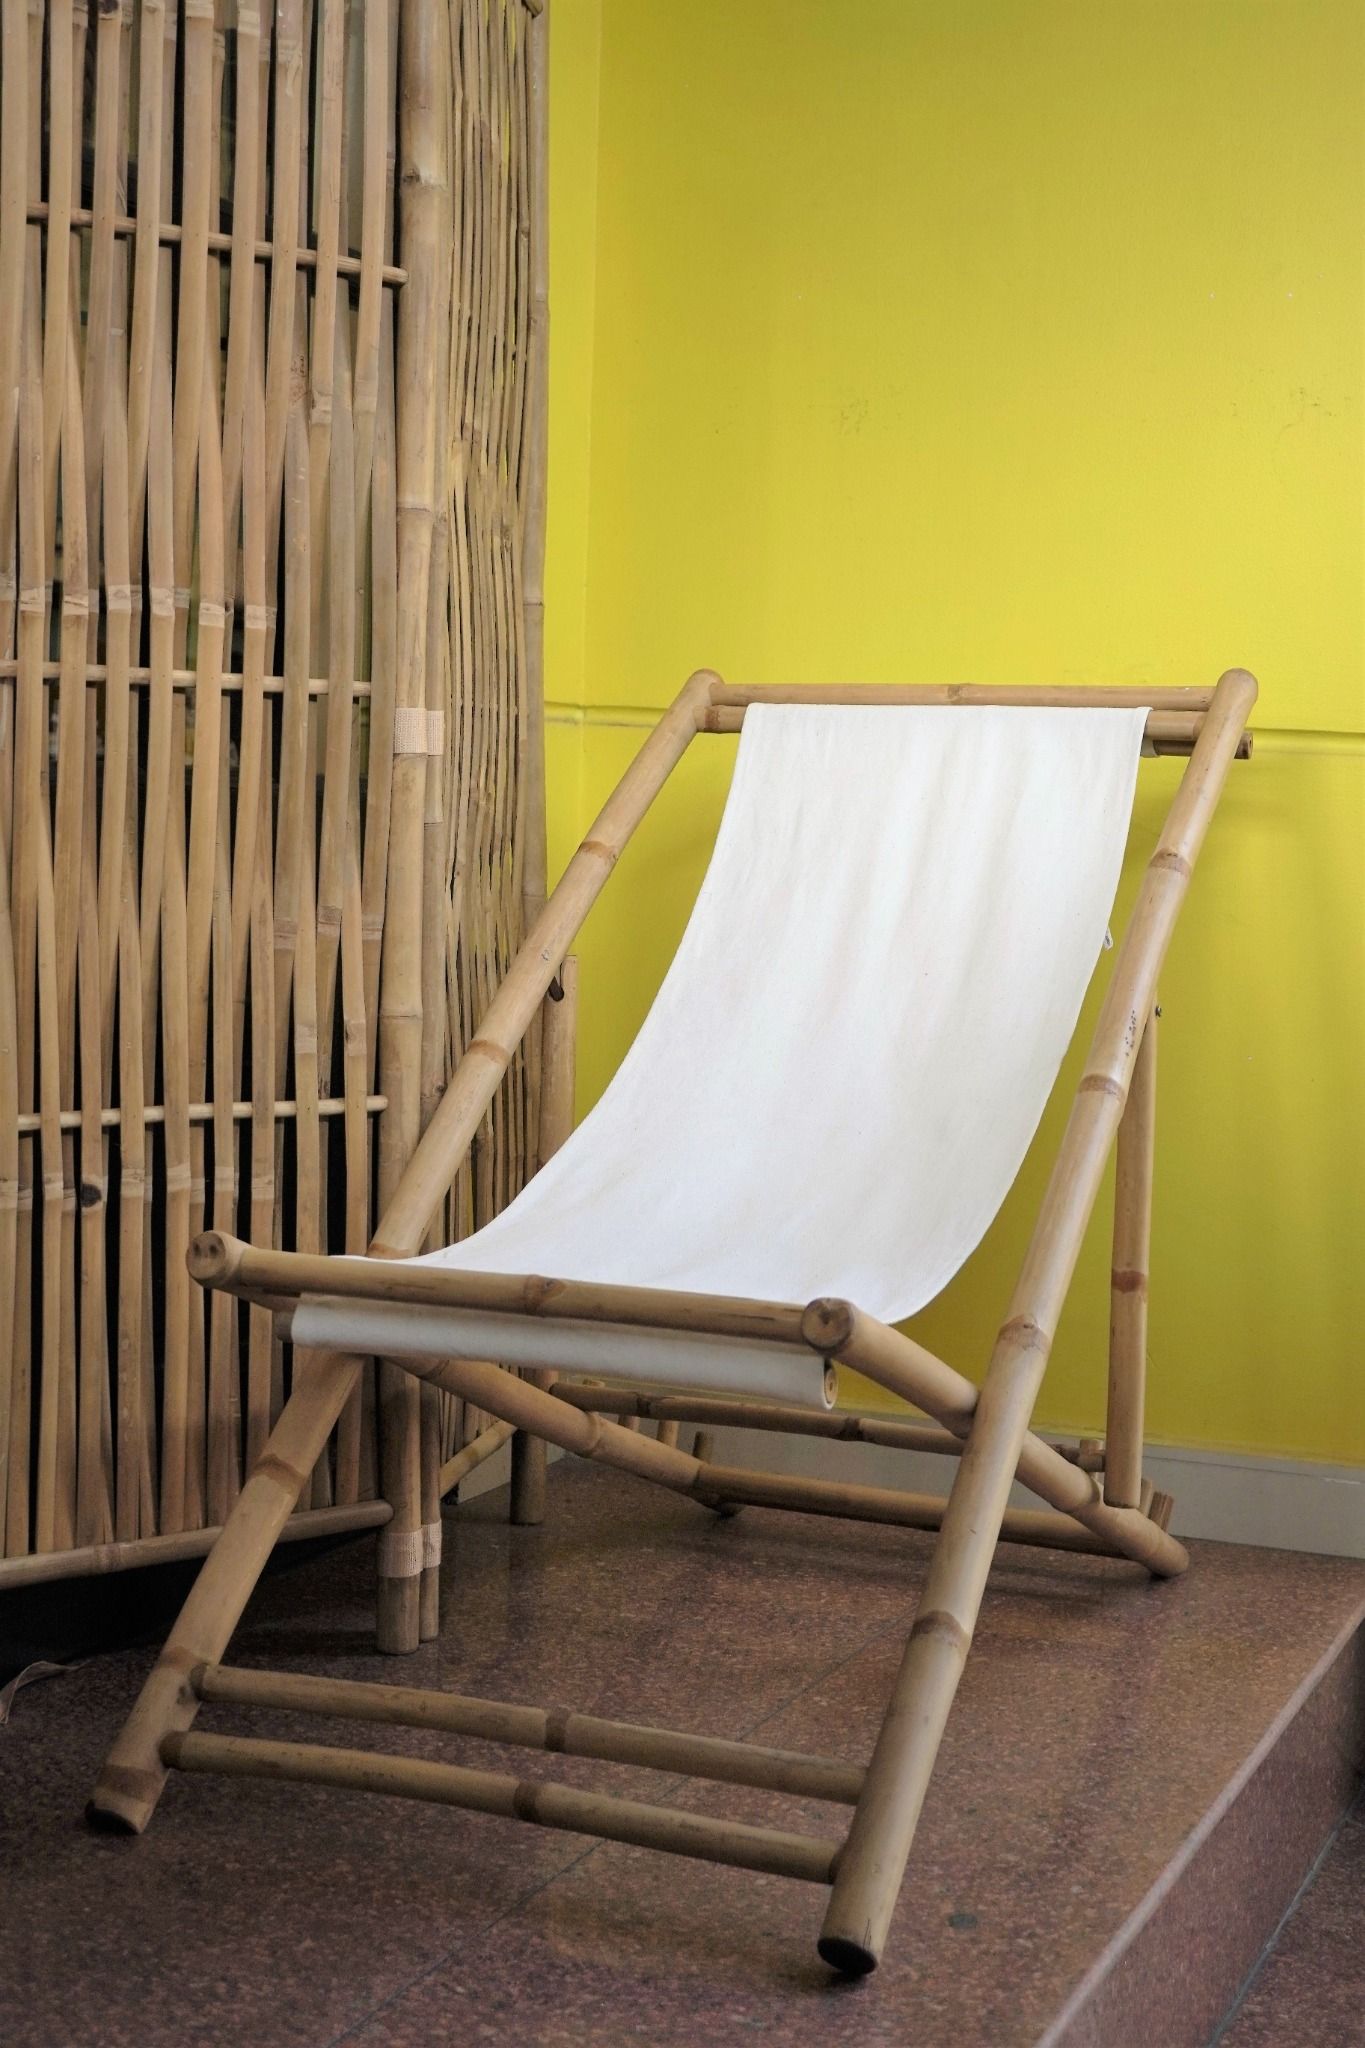  Bamboo Relax Chair 